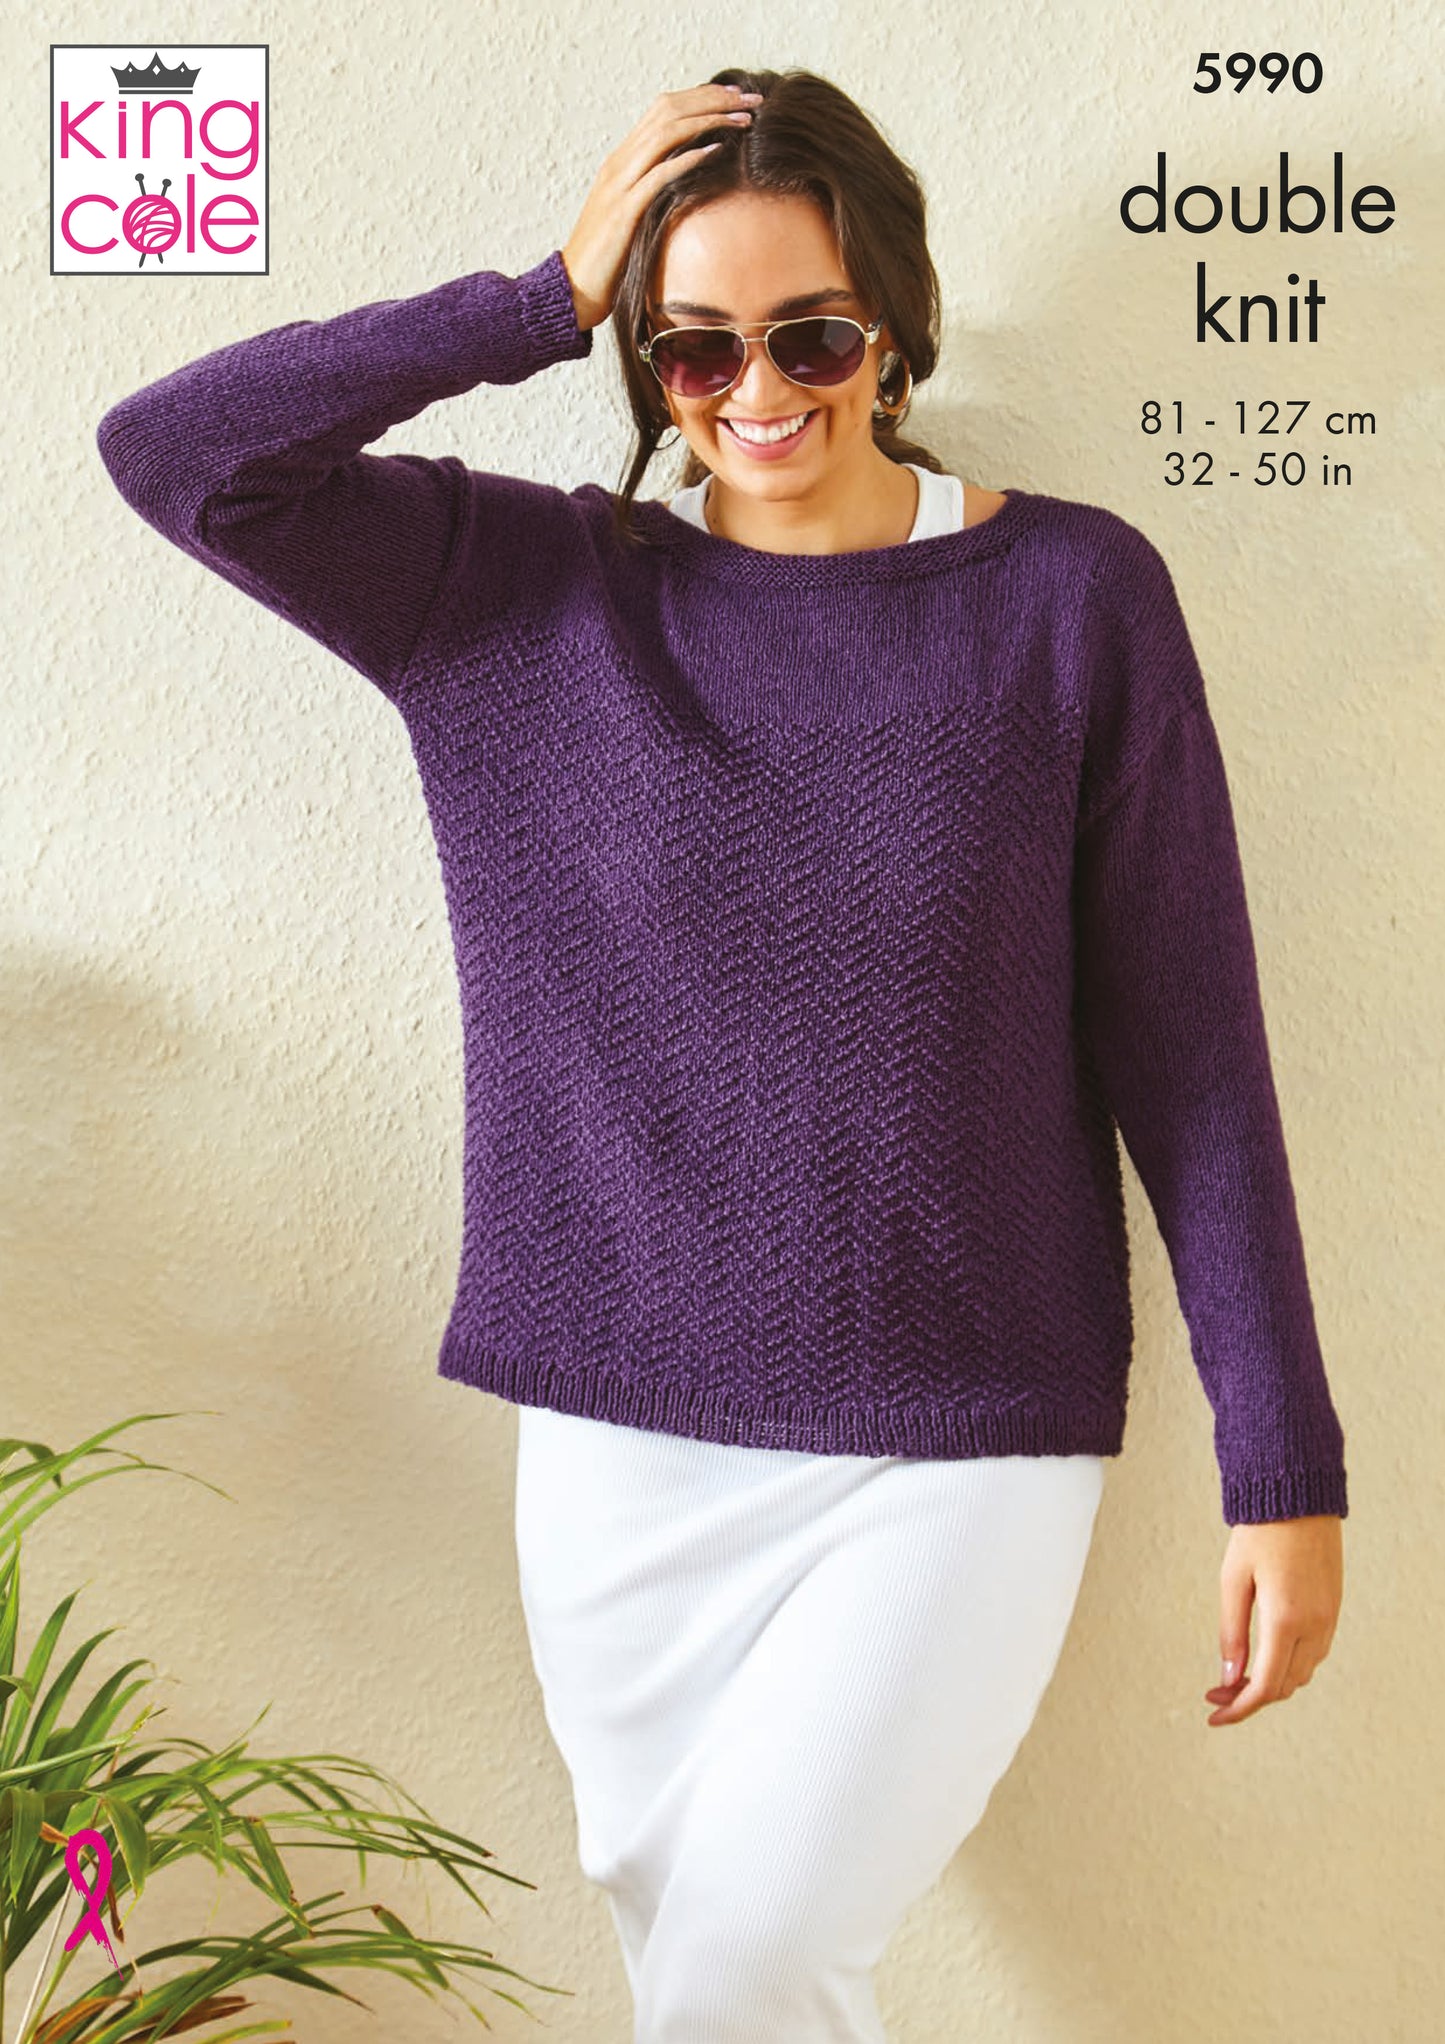 Sweater and Summer Top in King Cole Linendale DK - Pattern 5990